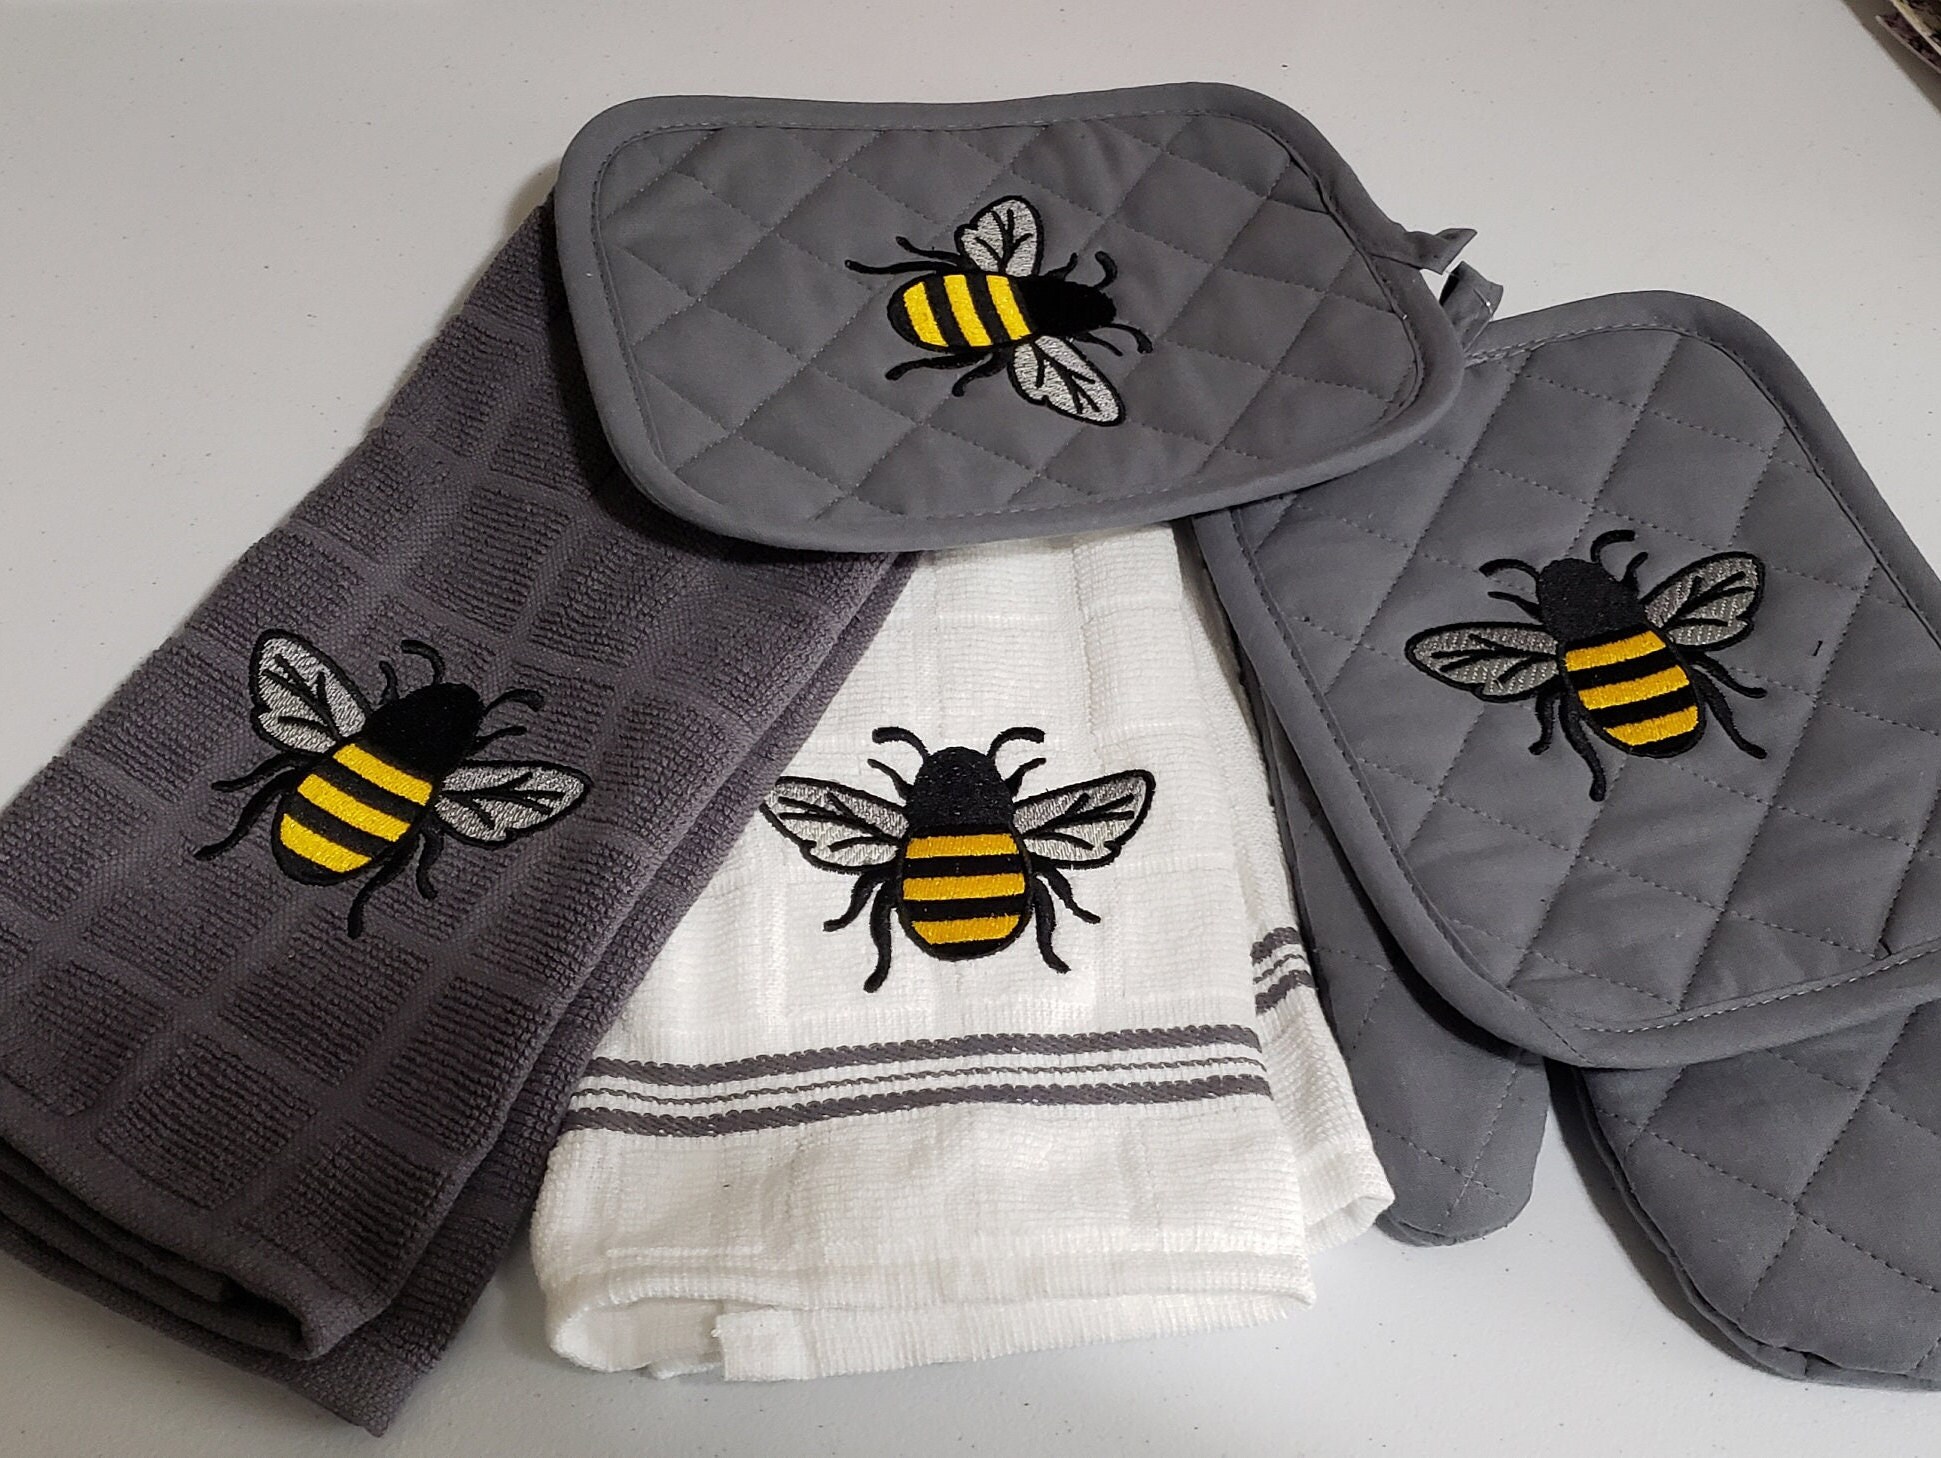 Greenbrier International Inc. Accents | Bumblebee Kitchen Towels, Pot Holders & Oven Mitts Set & Bumblebee Spoon Rest | Color: Black/Yellow | Size: Os